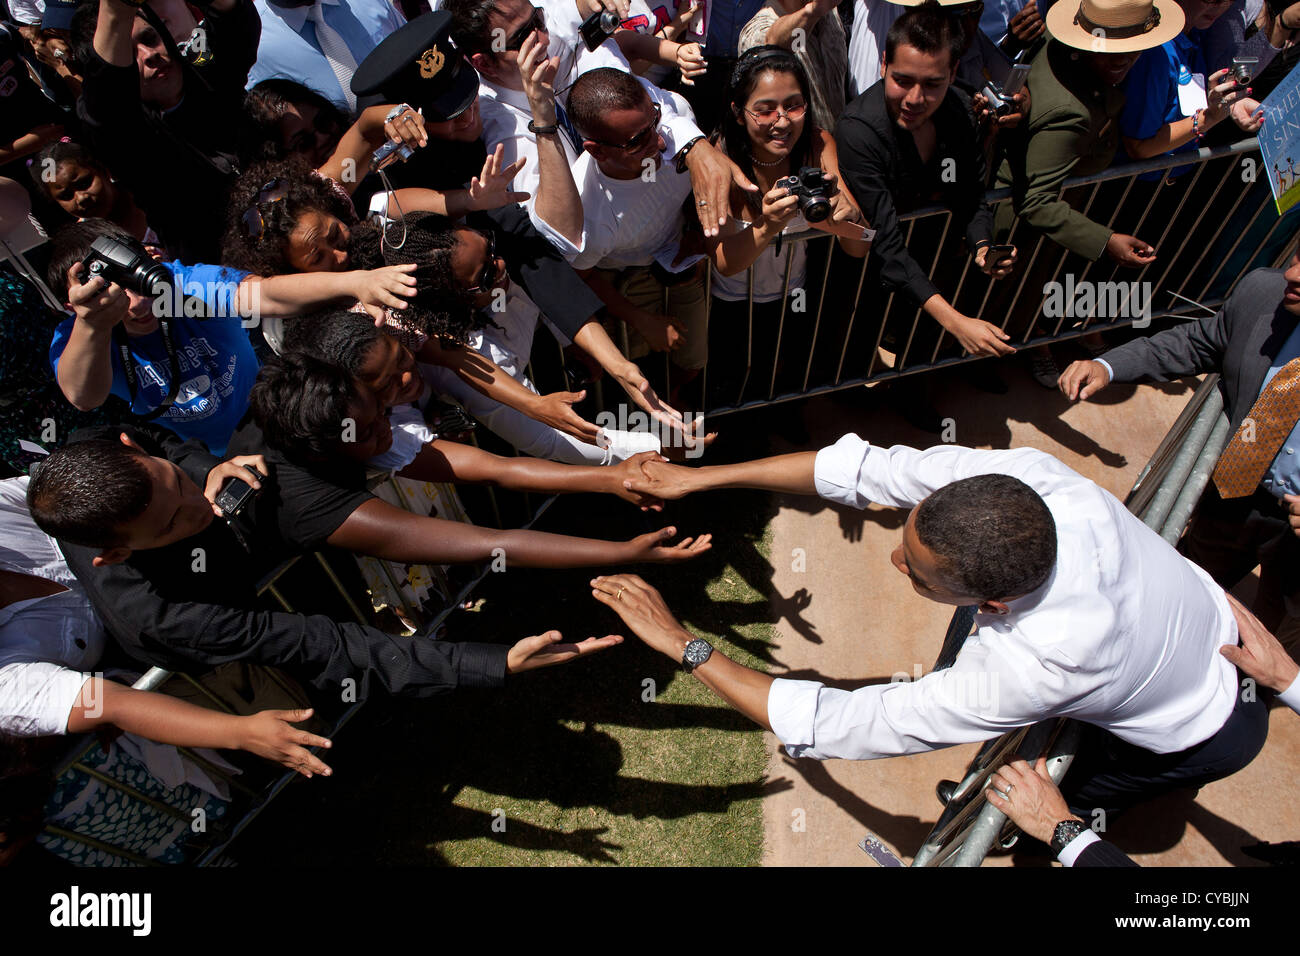 US President Barack Obama shakes hands with people in the crowd following his remarks on immigration reform at Chamizal National Memorial Park May 10, 2011 in El Paso, Texas. Stock Photo